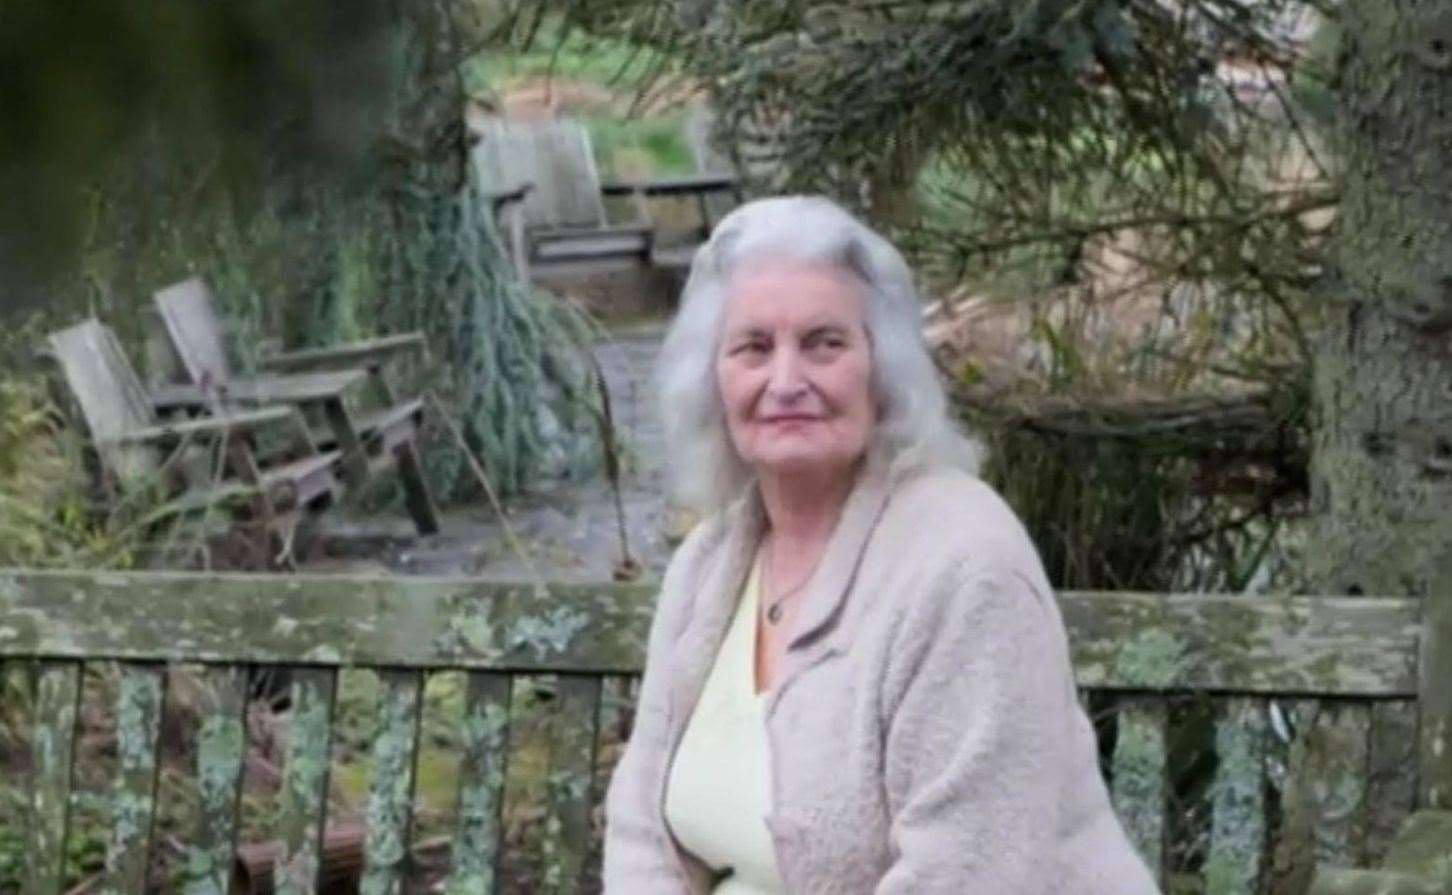 Joan Stone appeared on a Crimewatch Live episode on Friday, March 12, to speak about the burglary at her house Picture: BBC